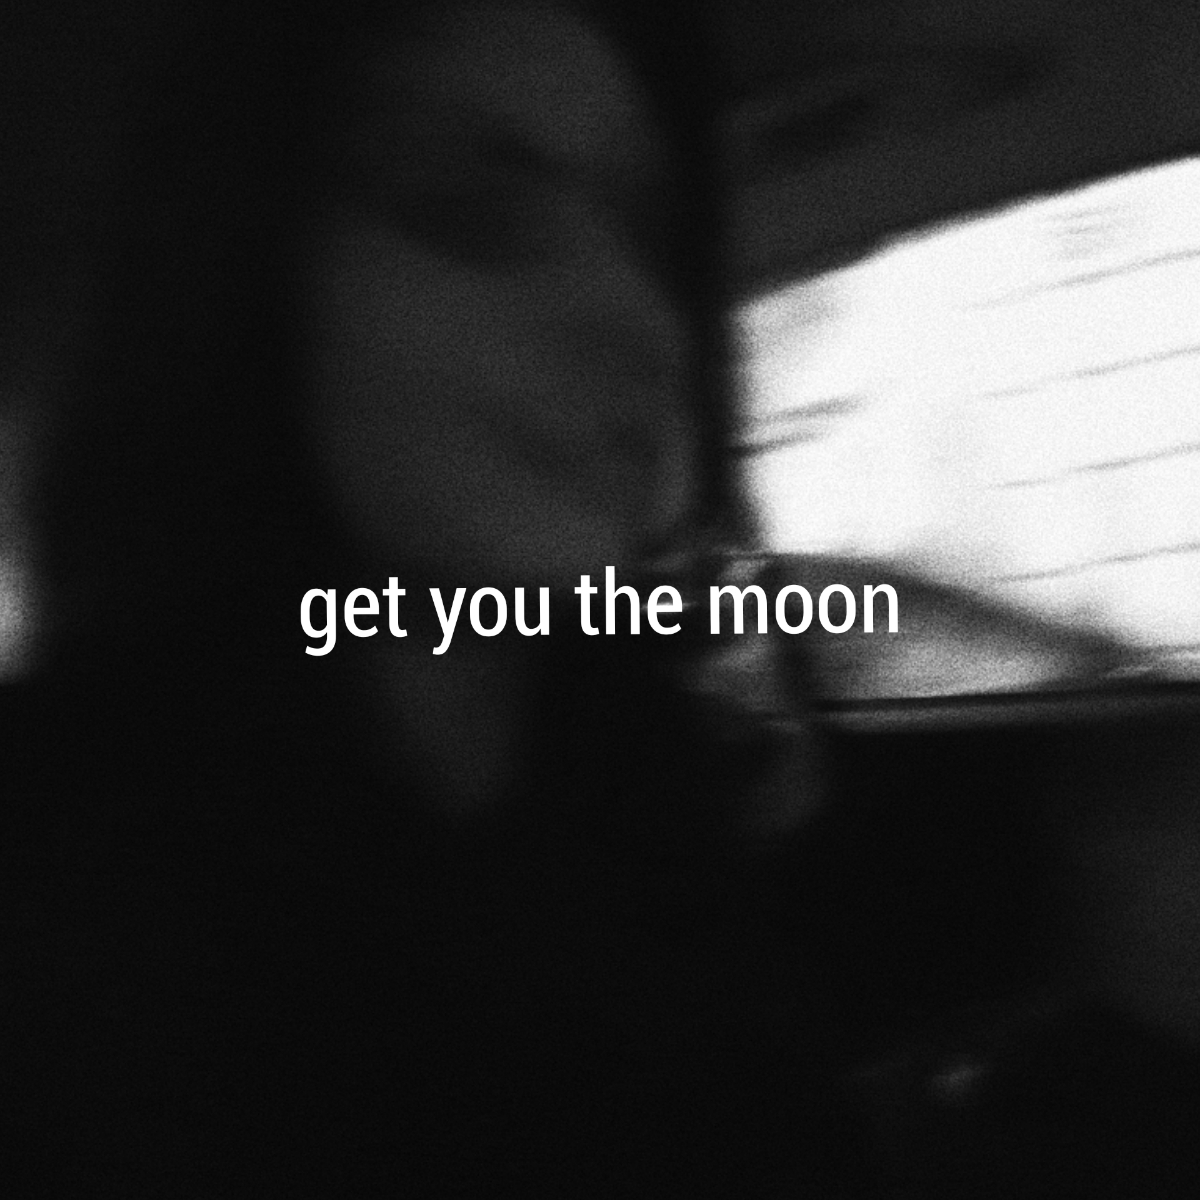 Download Kina - get you the moon (ft. Snow)